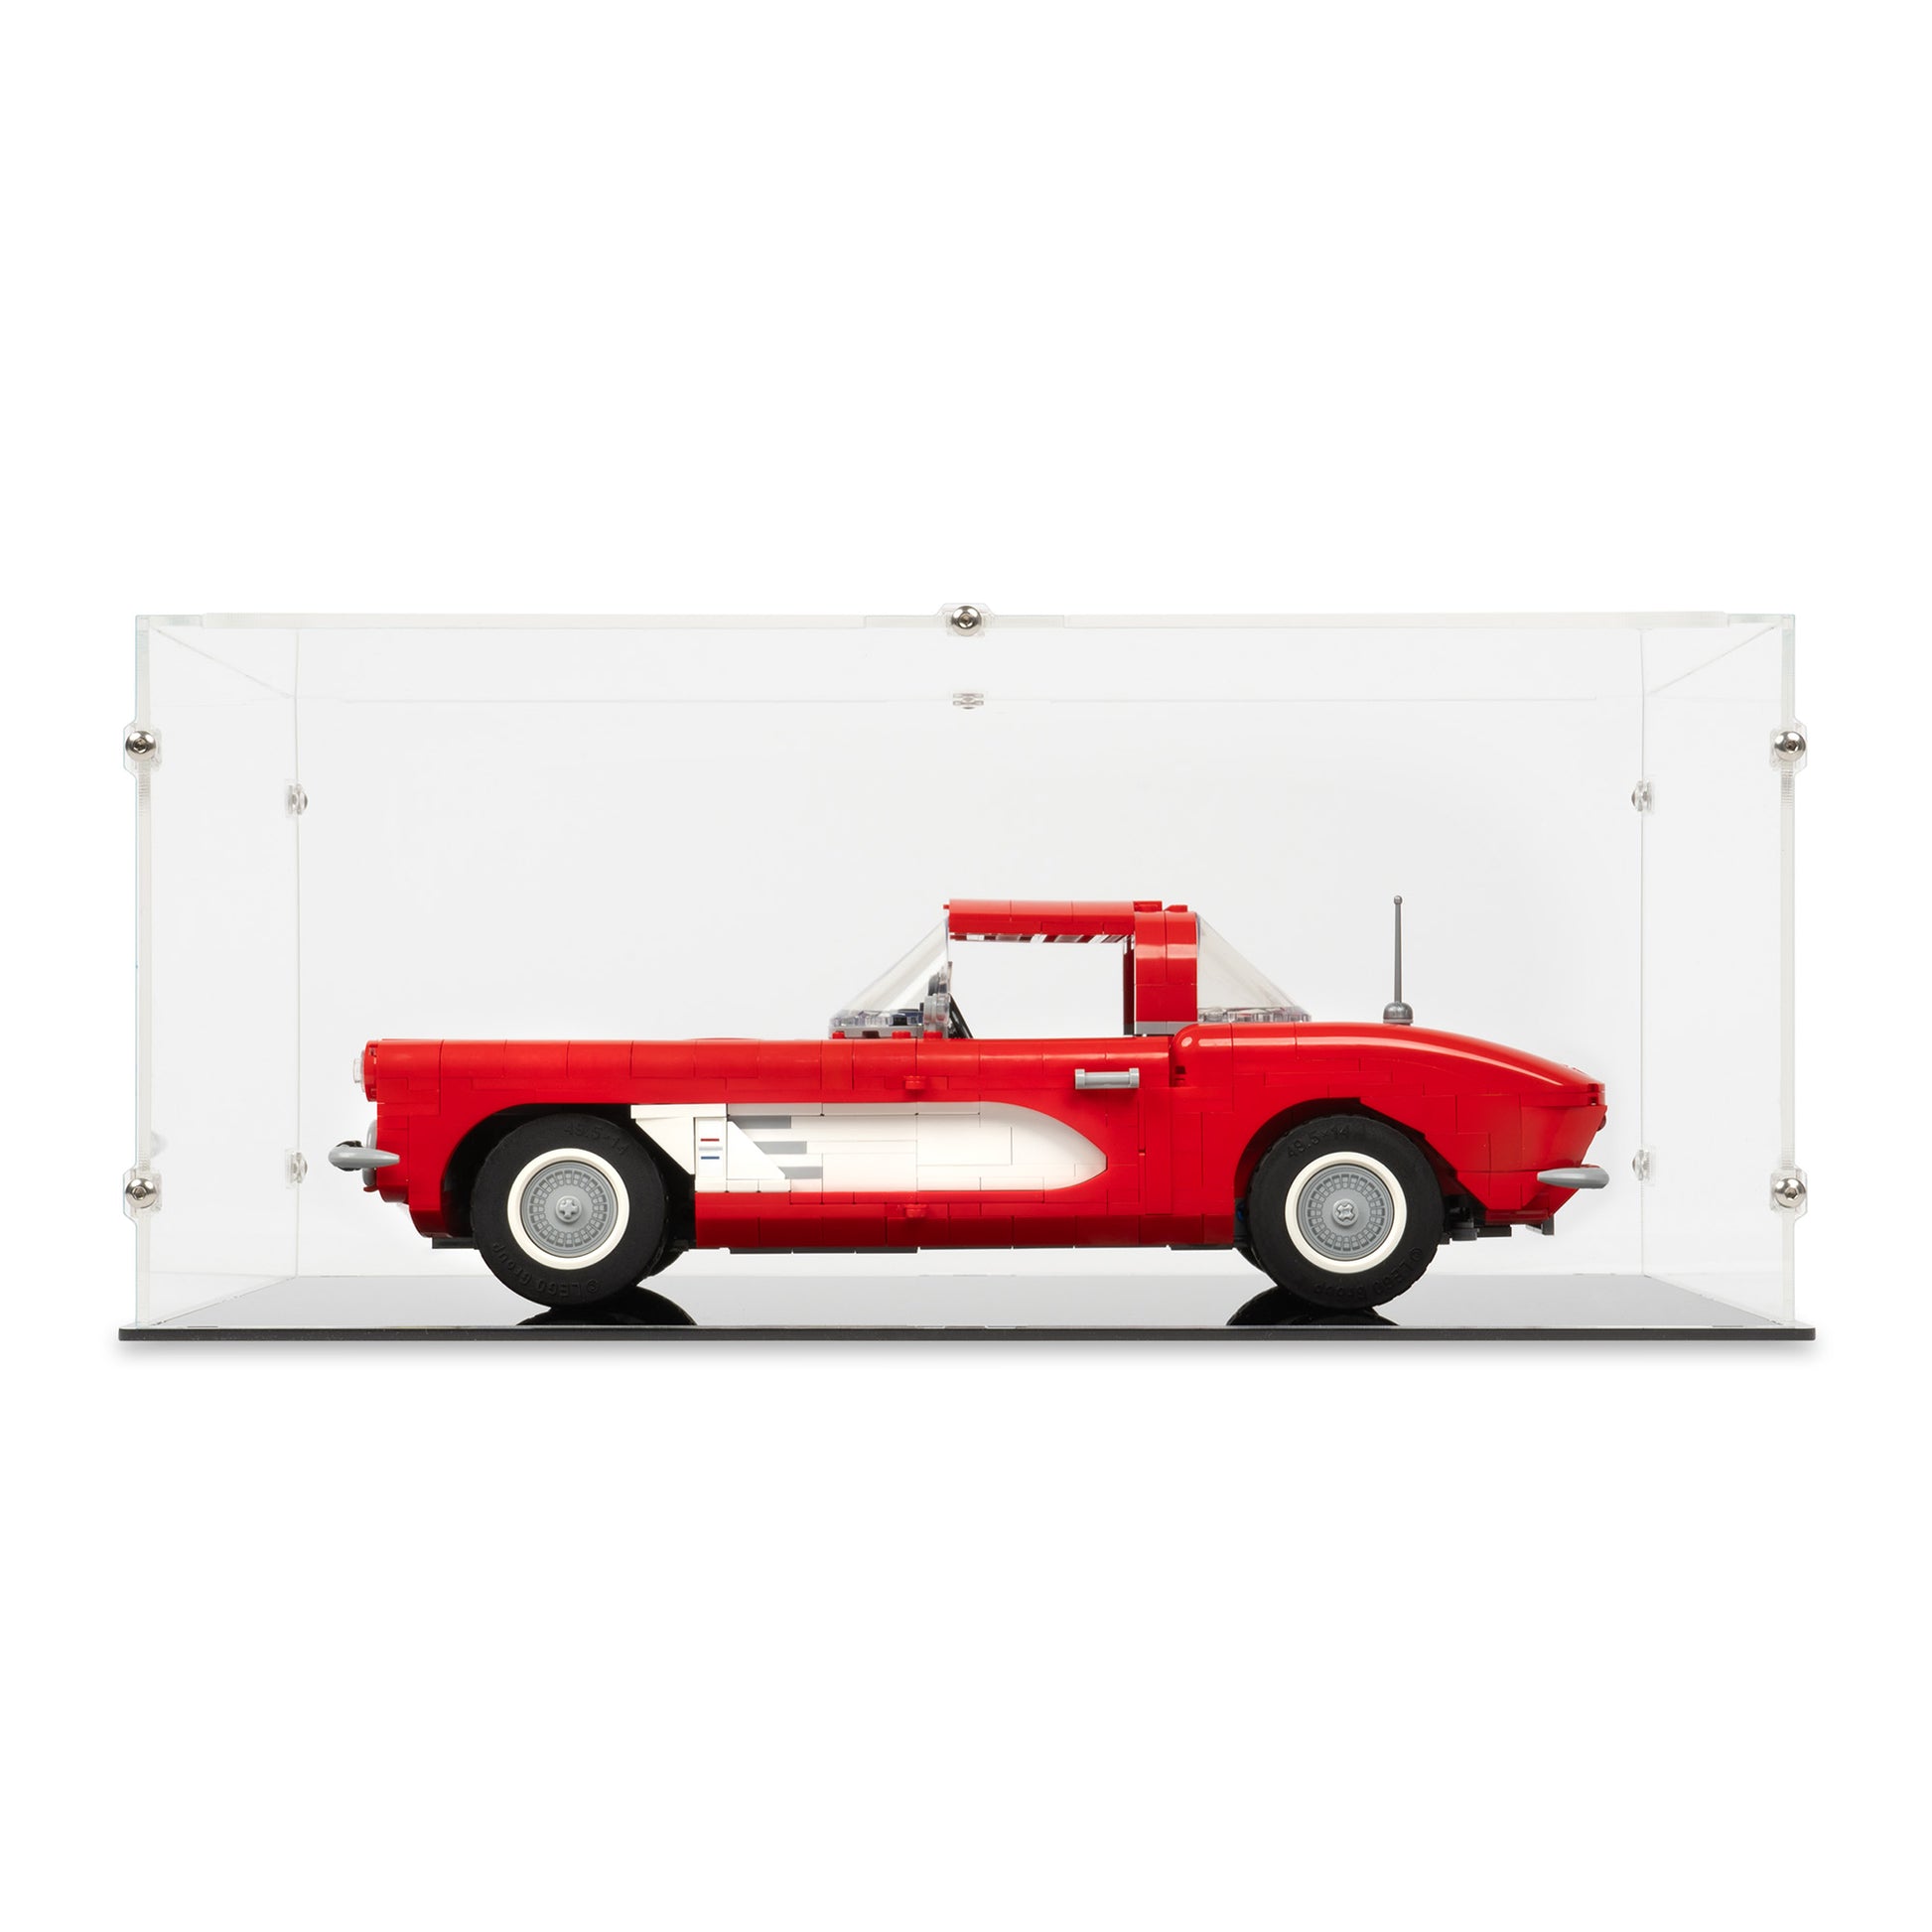 Front view of LEGO 10321 Chevrolet Corvette 1961 Display Case.